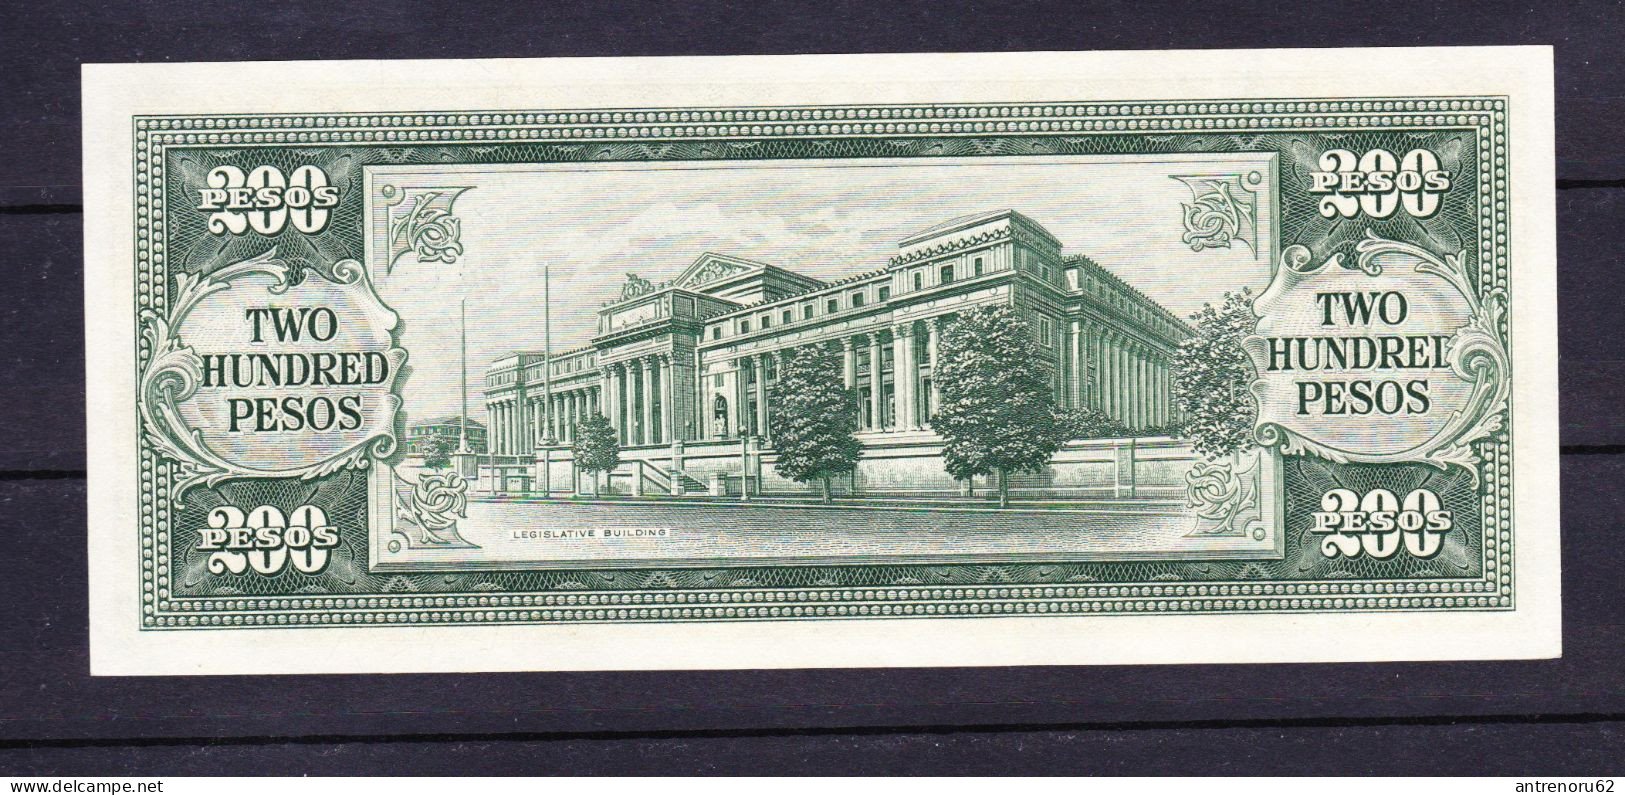 BANKNOTES-1949-PHILIPPINES-200-UNC-SEE-SCAN - Filippine